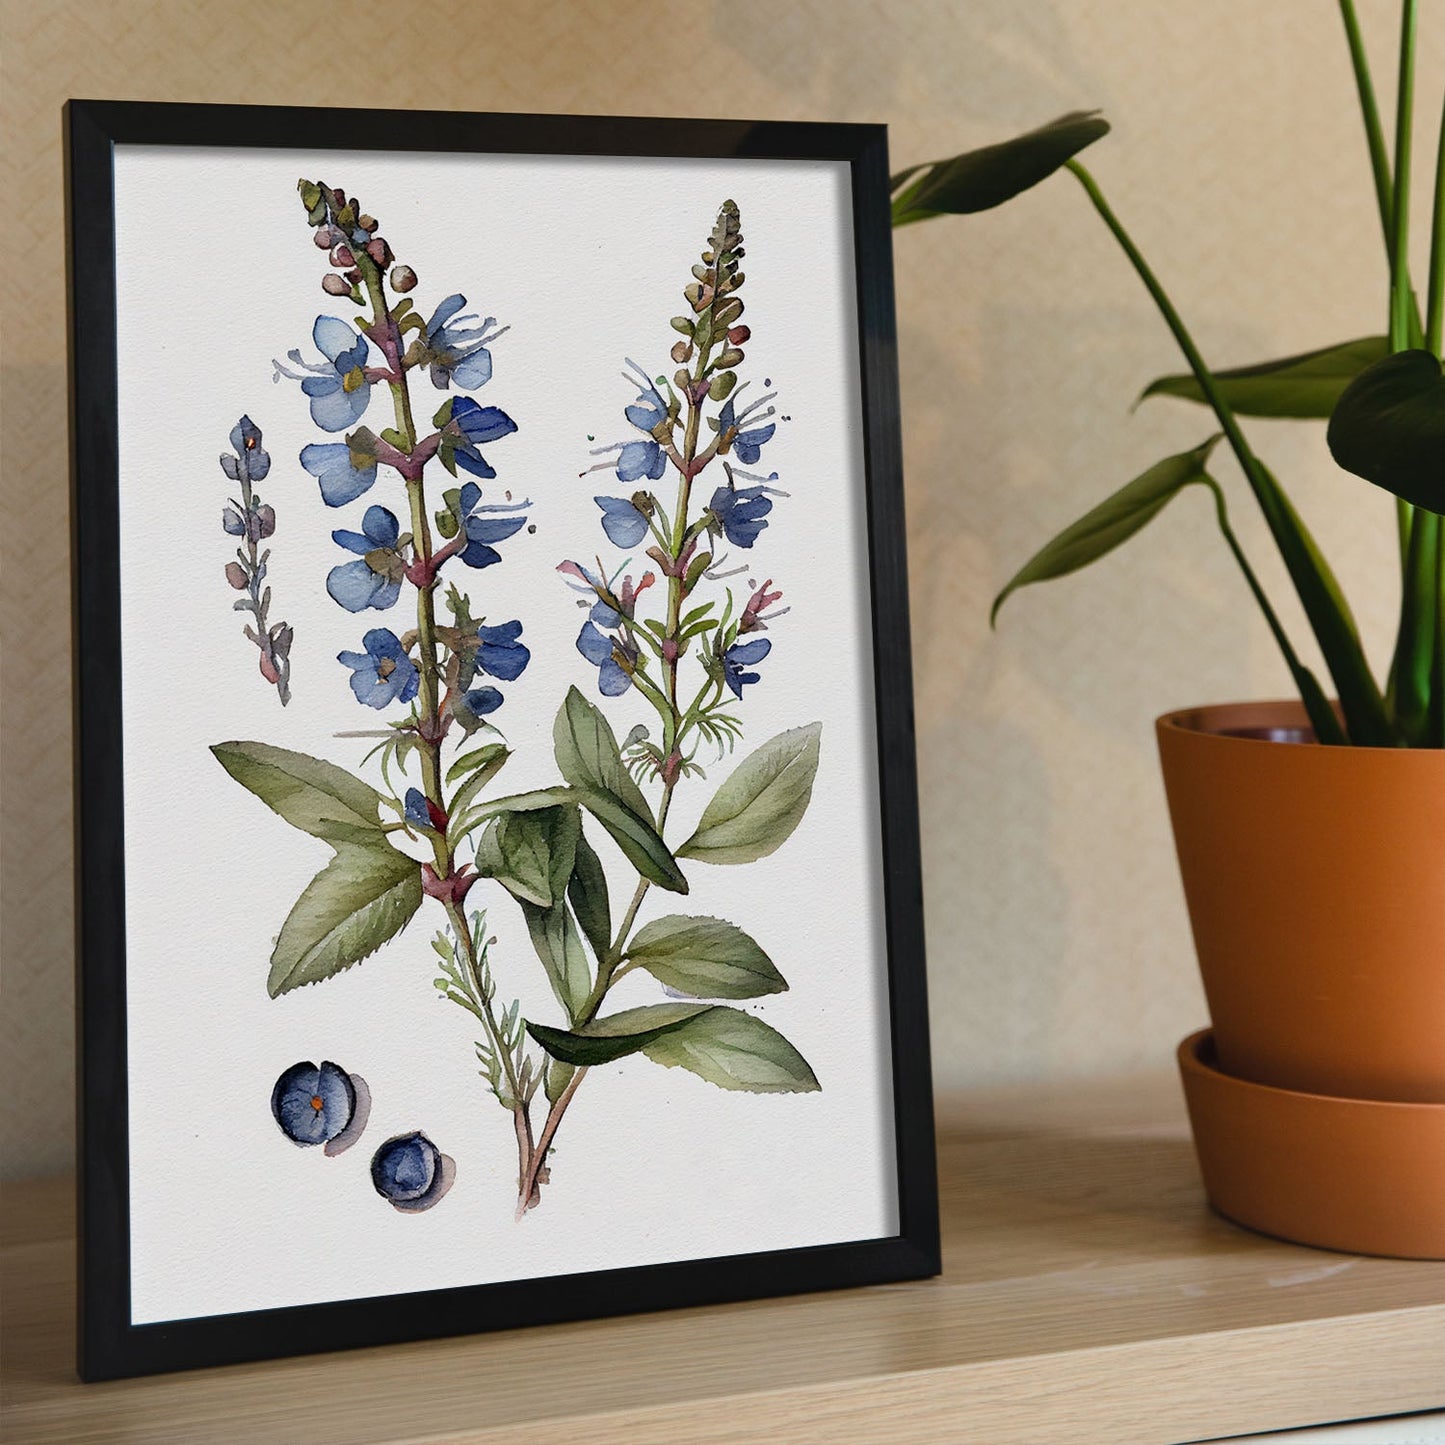 Nacnic watercolor minmal Speedwell_2. Aesthetic Wall Art Prints for Bedroom or Living Room Design.-Artwork-Nacnic-A4-Sin Marco-Nacnic Estudio SL